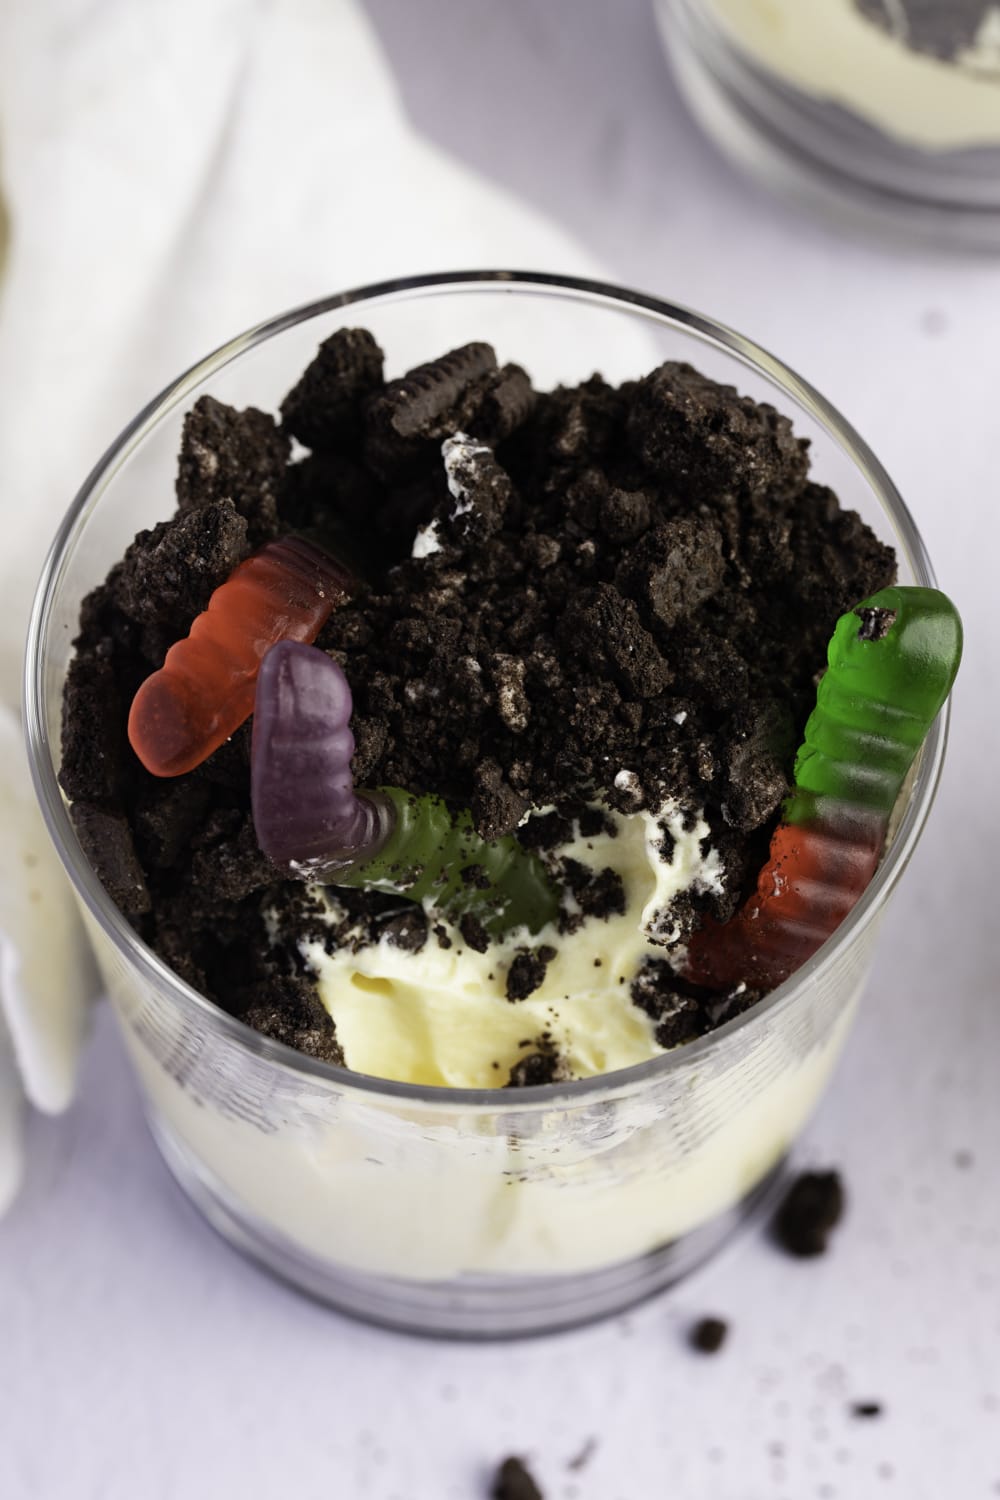 Dirt Pudding Topped With Crushed Oreos and Gummy Worms